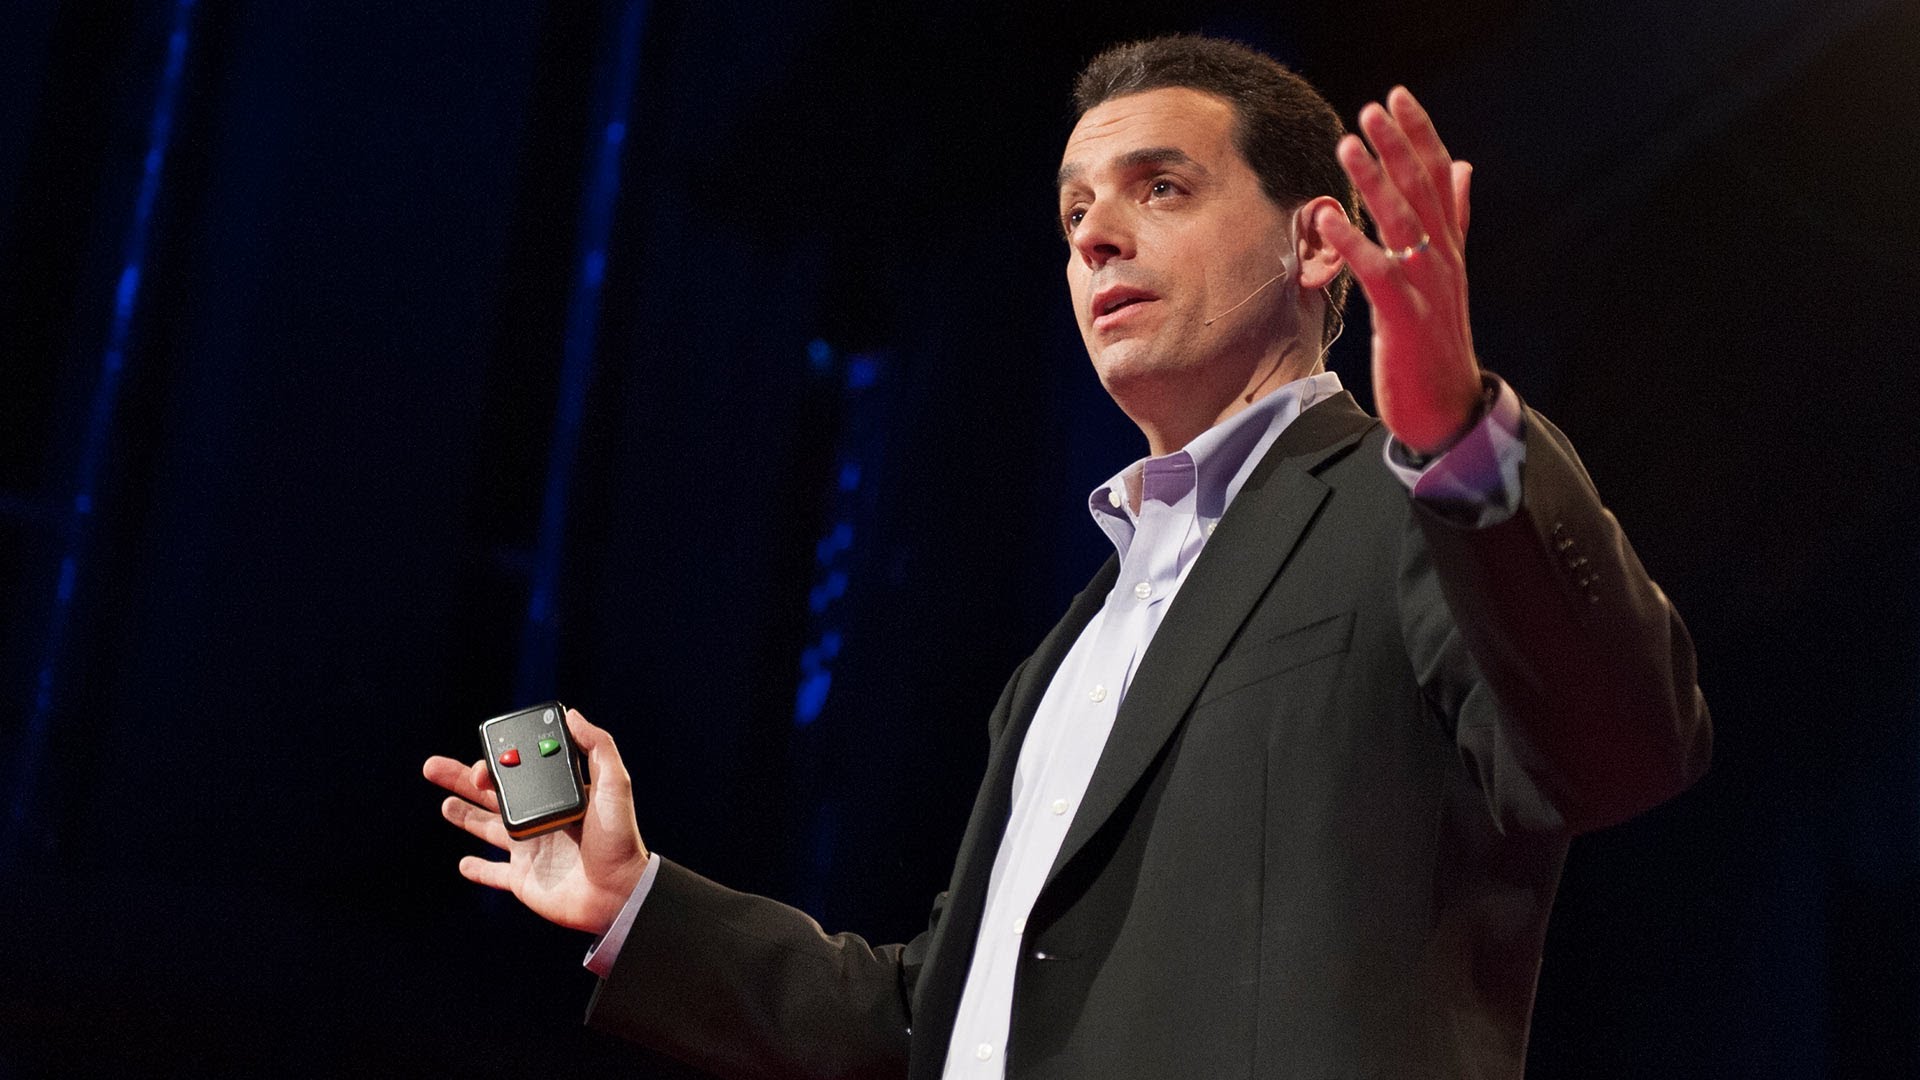 Daniel Pink – Drive: The Surprising Truth About What Motivates Us